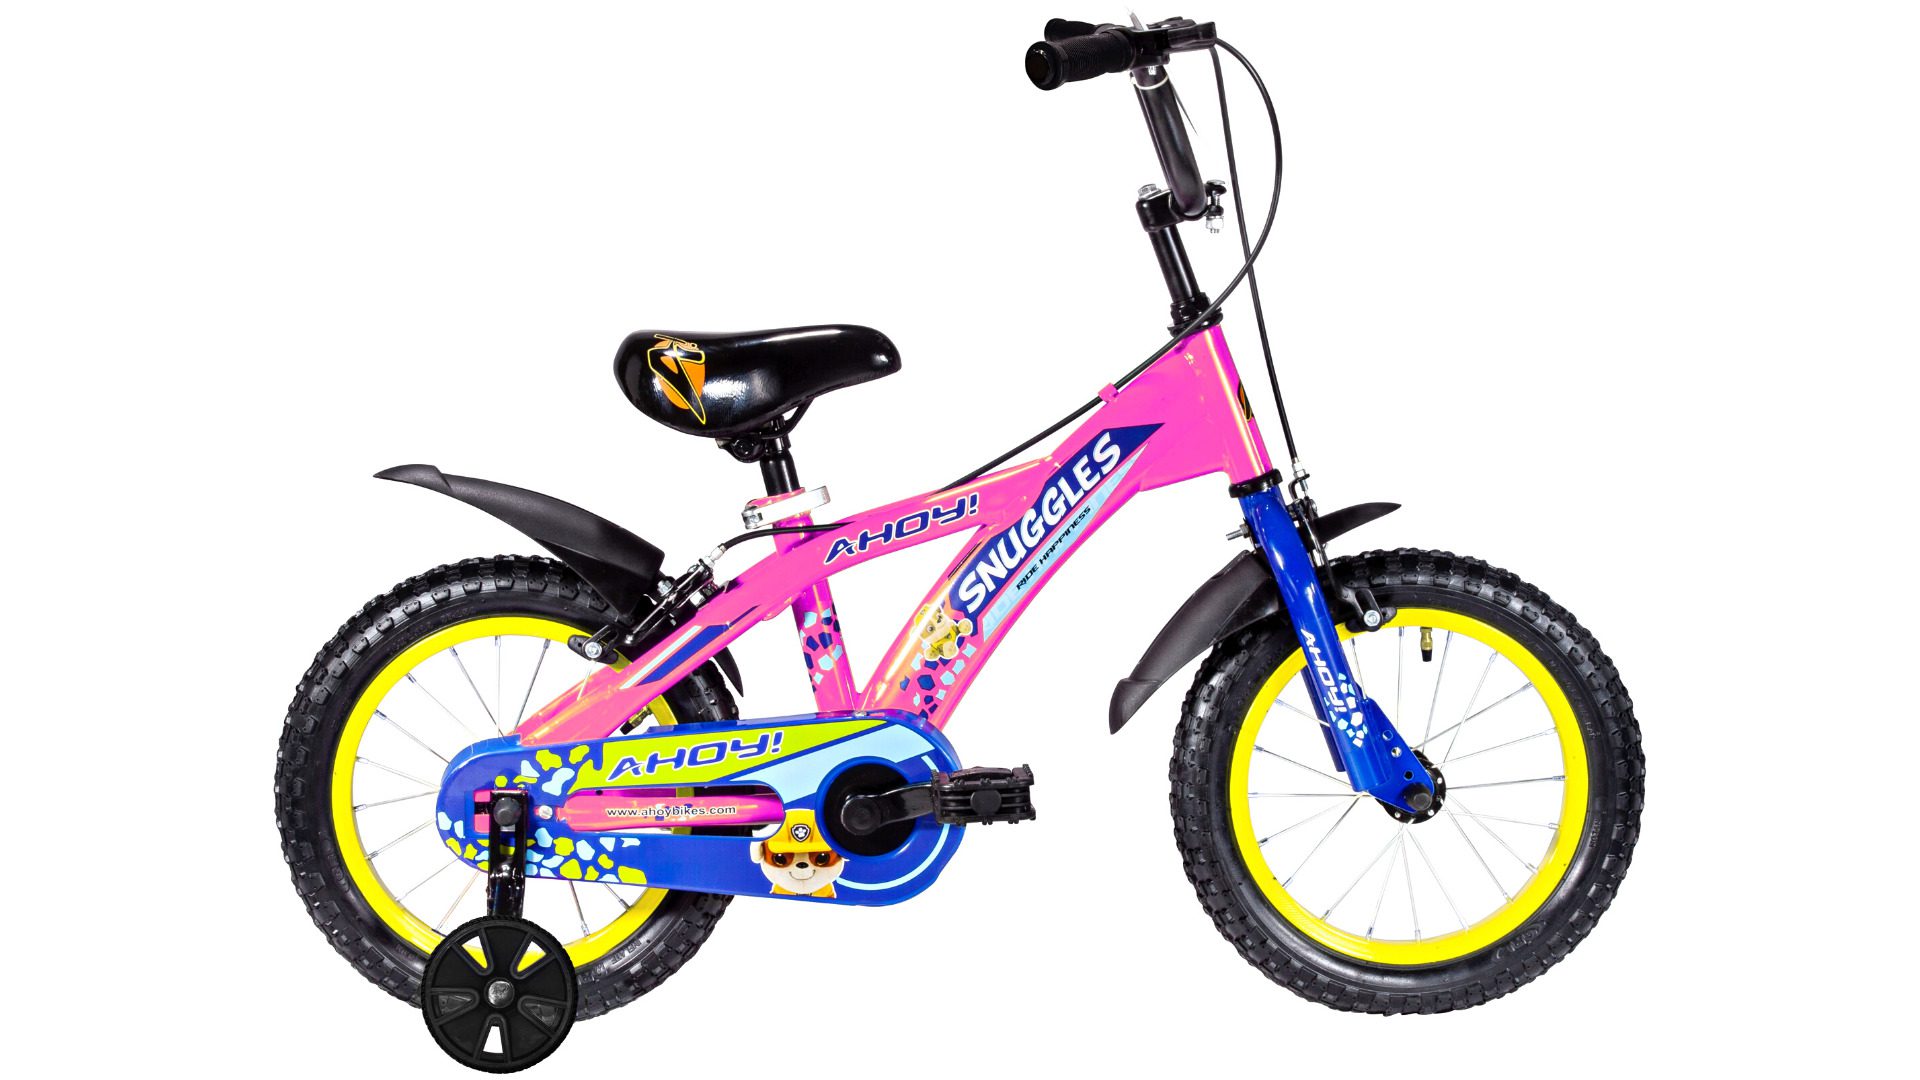 Snuggles Girls Bike Single Speed 14T | Buy Pink Cycle Non Gear for Kids